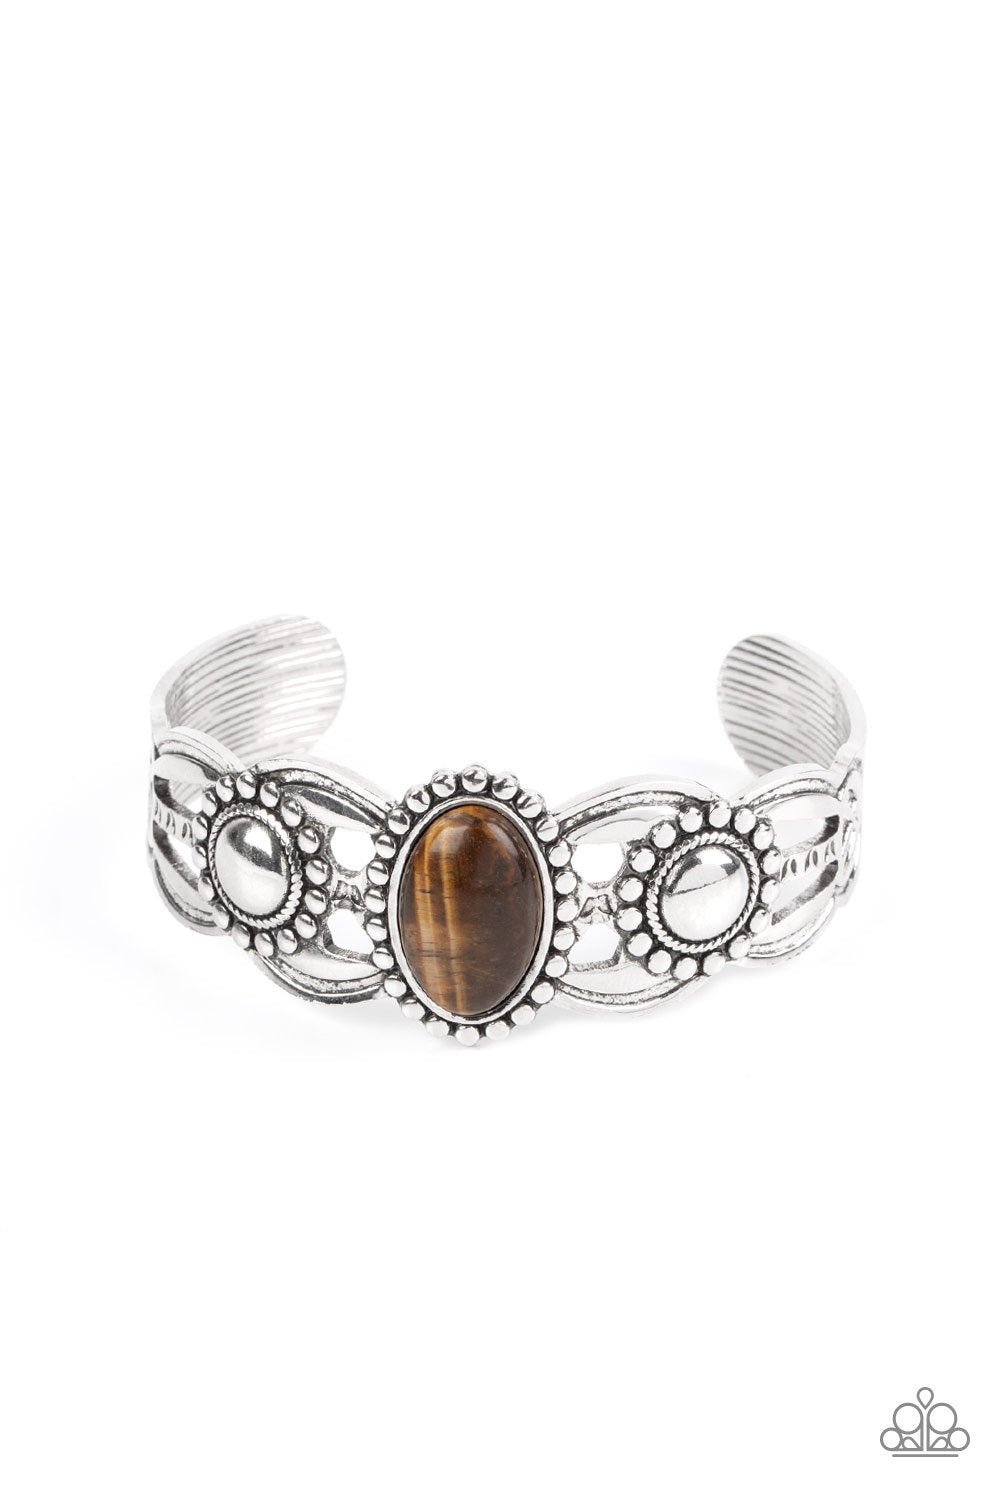 Solar Solstice Brown Tiger's Eye Stone and Silver Cuff Bracelet - Paparazzi Accessories 2021 Convention Exclusive- lightbox - CarasShop.com - $5 Jewelry by Cara Jewels